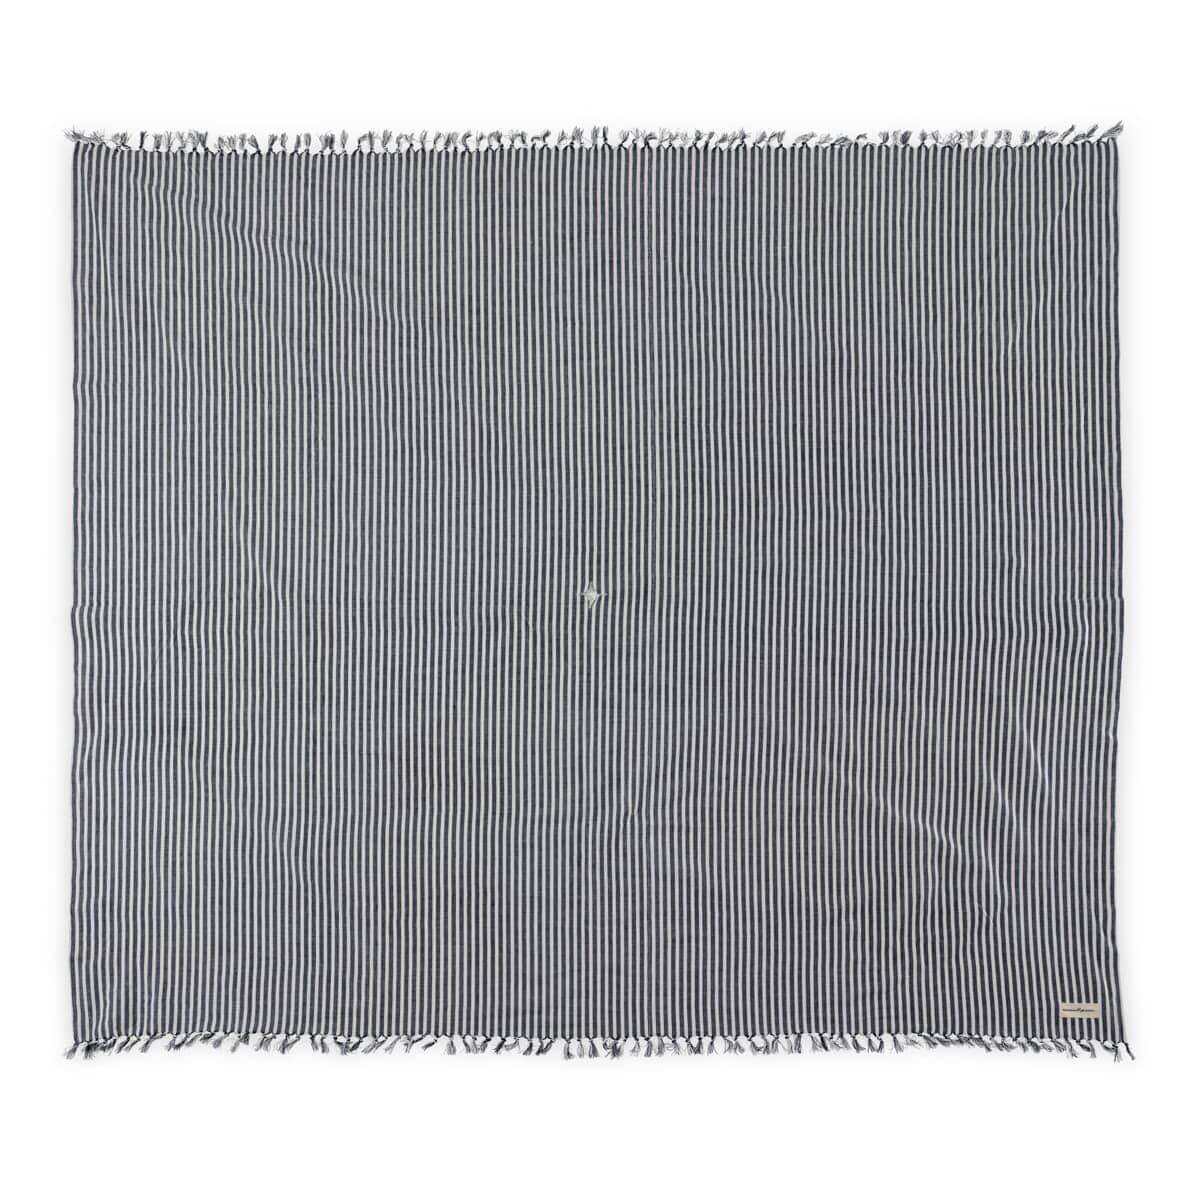 Studio image of navy tablecloth